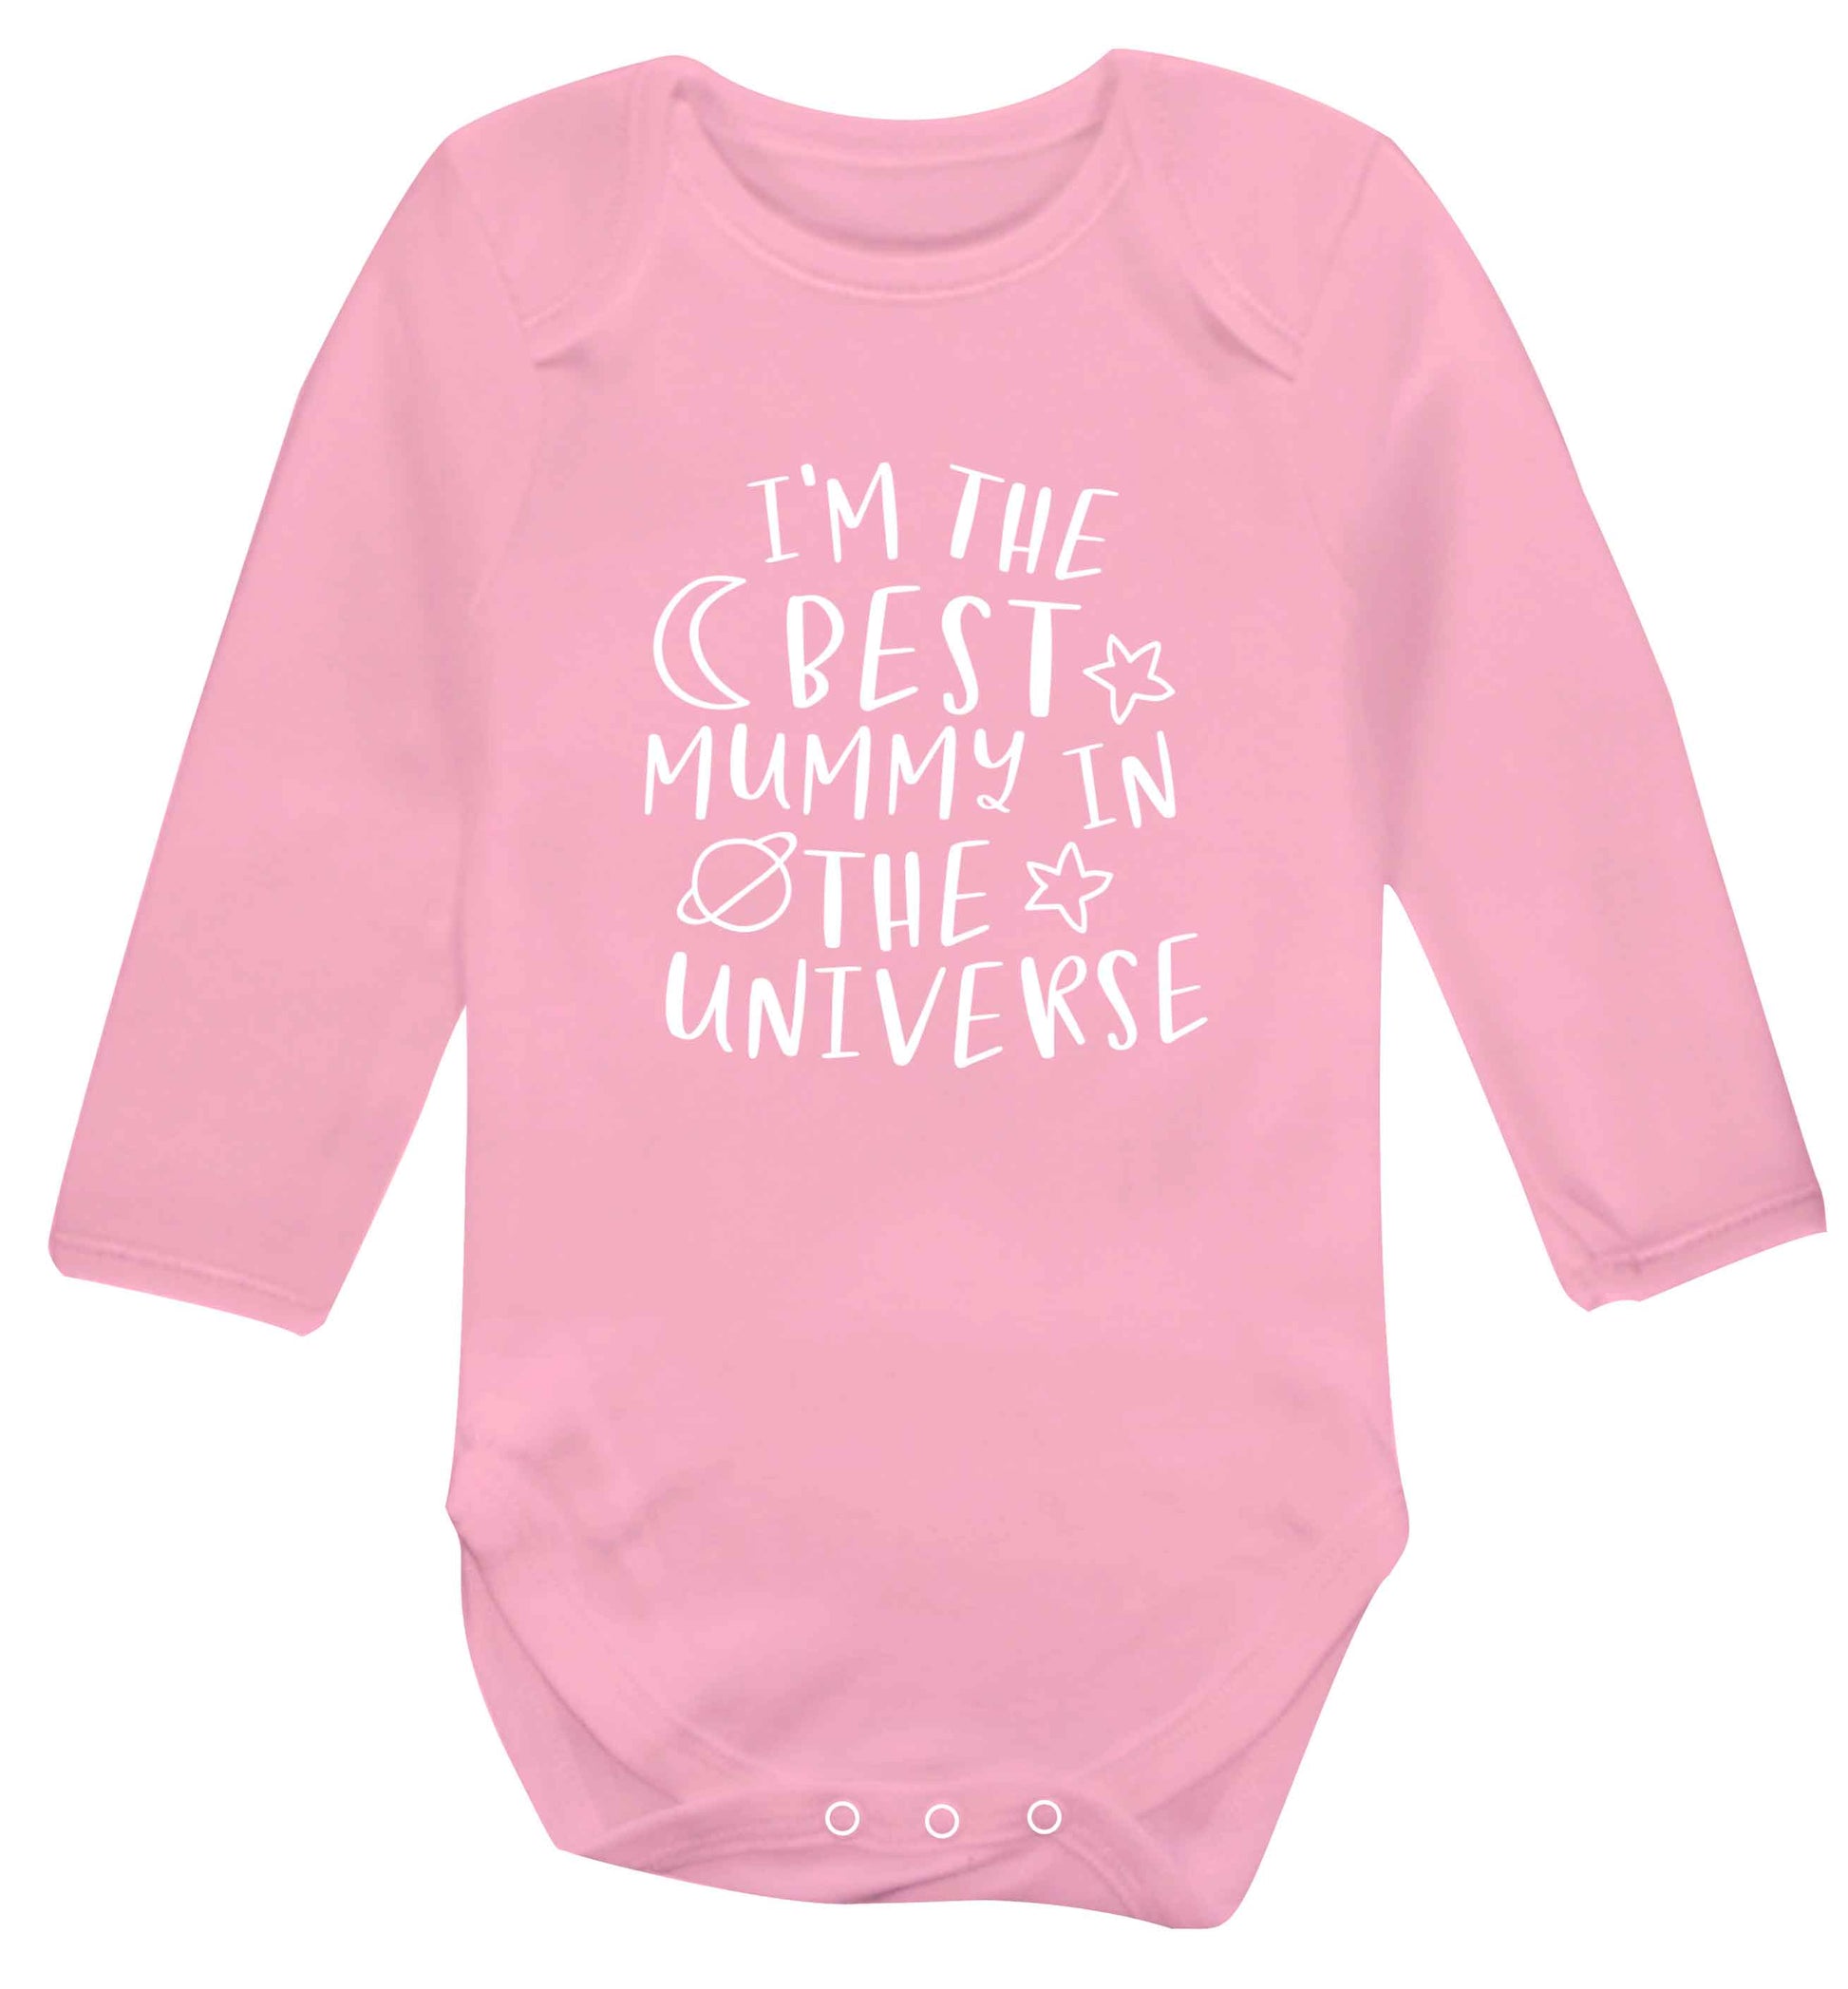 I'm the best mummy in the universe baby vest long sleeved pale pink 6-12 months